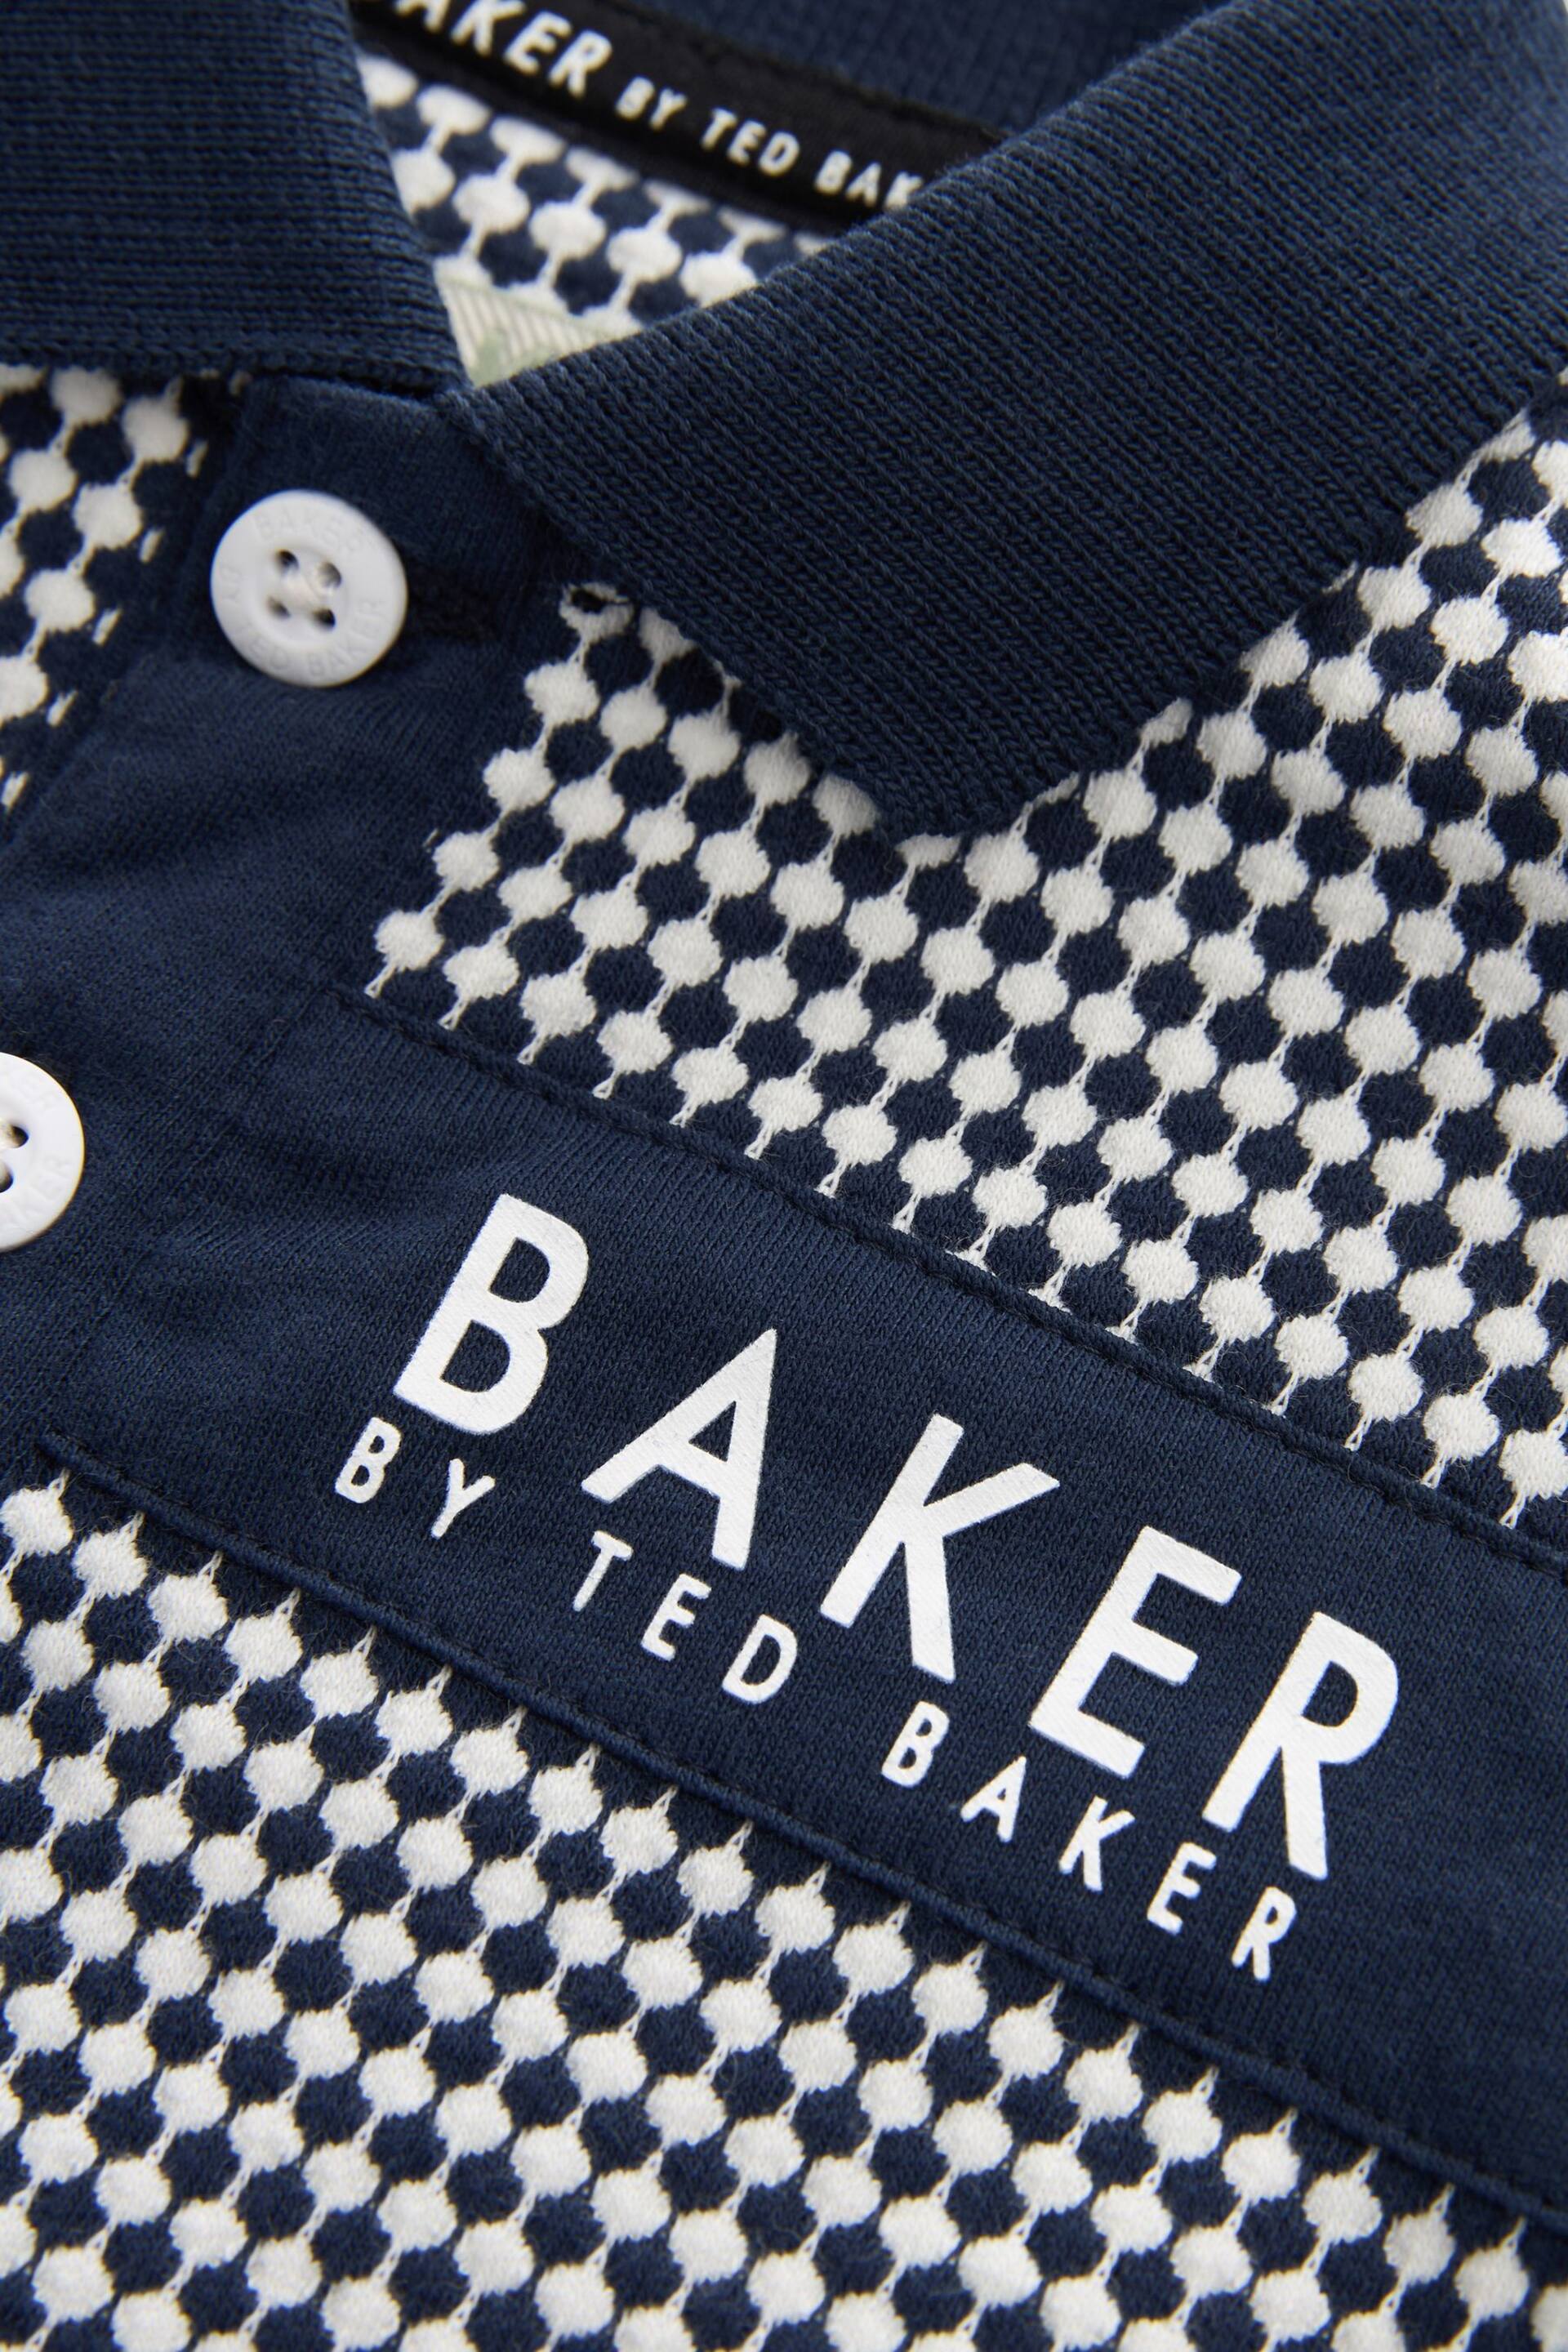 Baker by Ted Baker Textured Polo Shirt and Short Set - Image 9 of 10